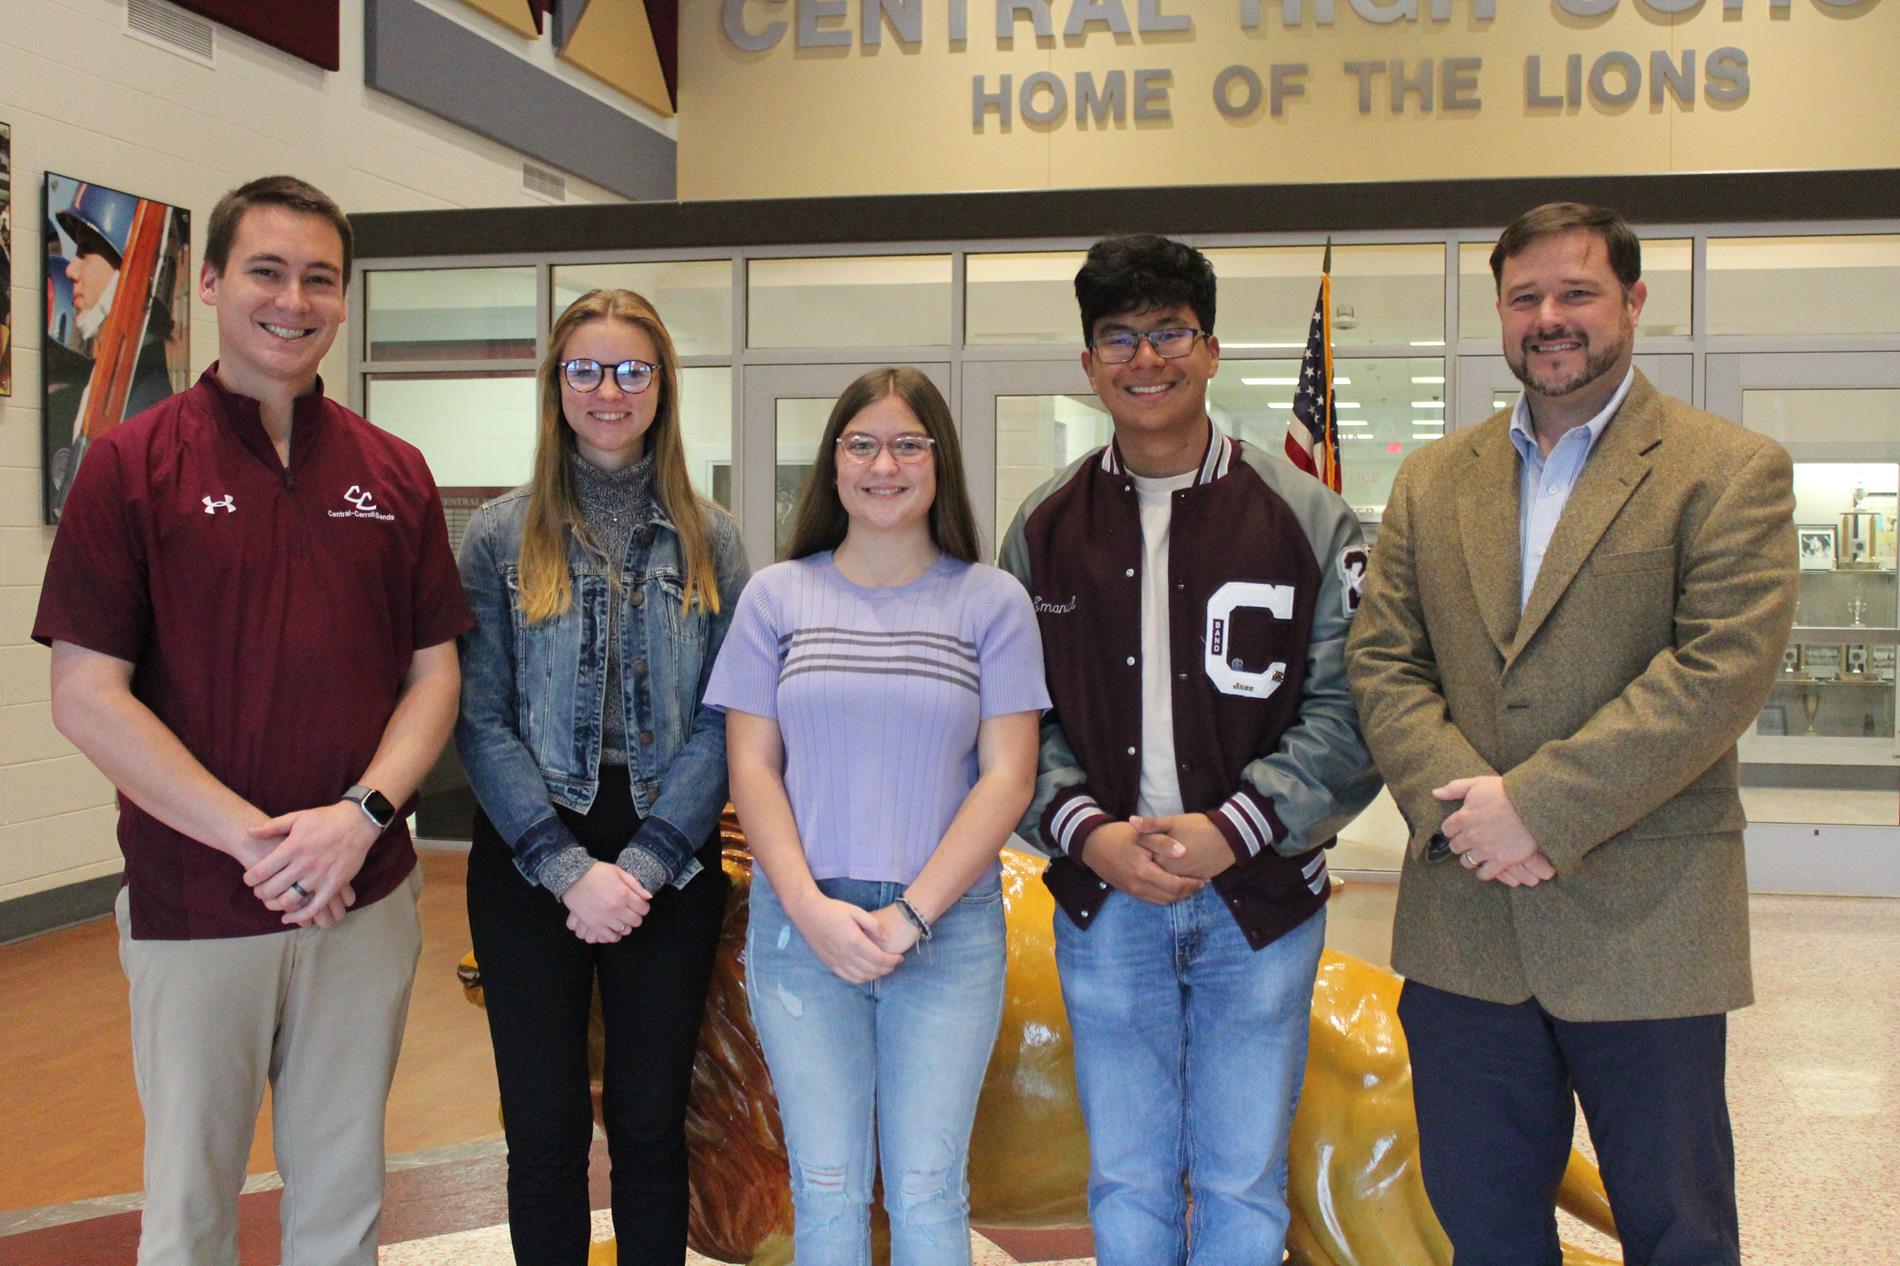 Two Central High School Students Selected for Georgia All-State Band